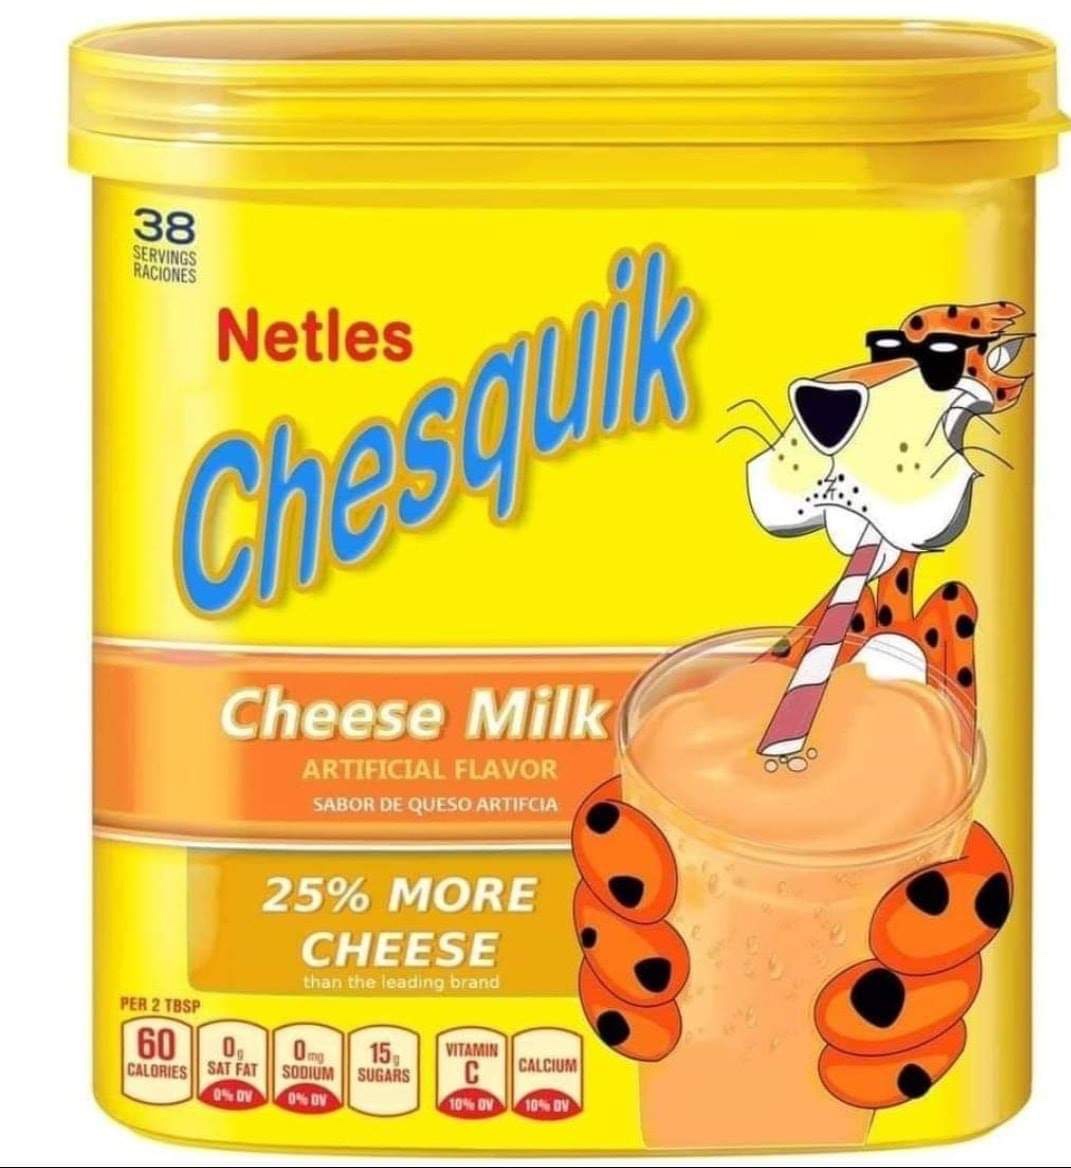 nesquik cheese milk - 38 Servings Raciones Netles Chesgy Cheese Milk Artificial Flavor Sabor De Queso Artifcia 25% More Cheese than the leading brand Per 2 Tbsp 60 09 On 15, Vitamin Calories Calcium Sat Fat Sodium Osovo On Sugars 10% On